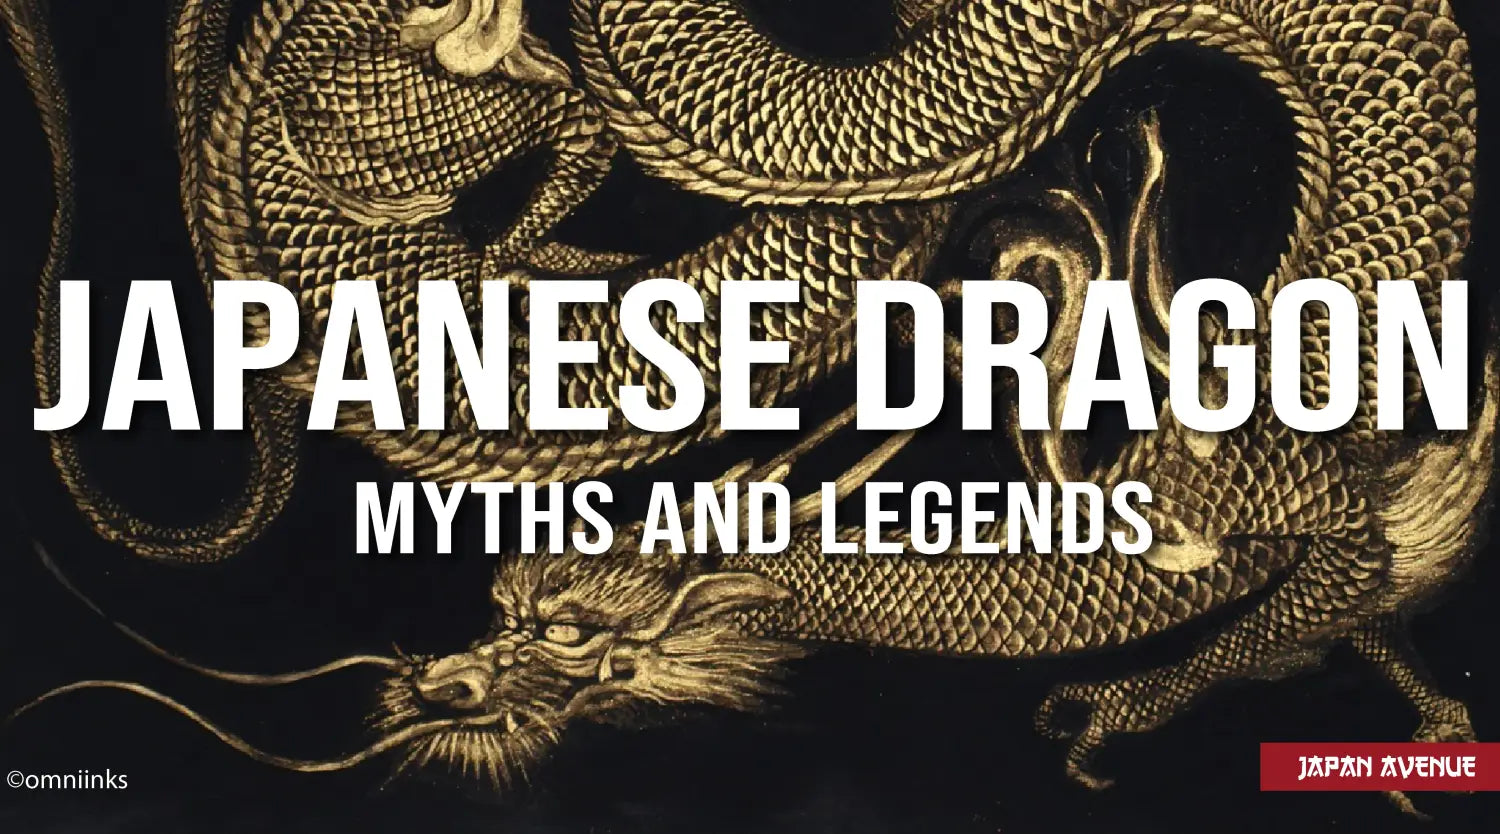 The Japanese Dragon [Ultimate Guide]